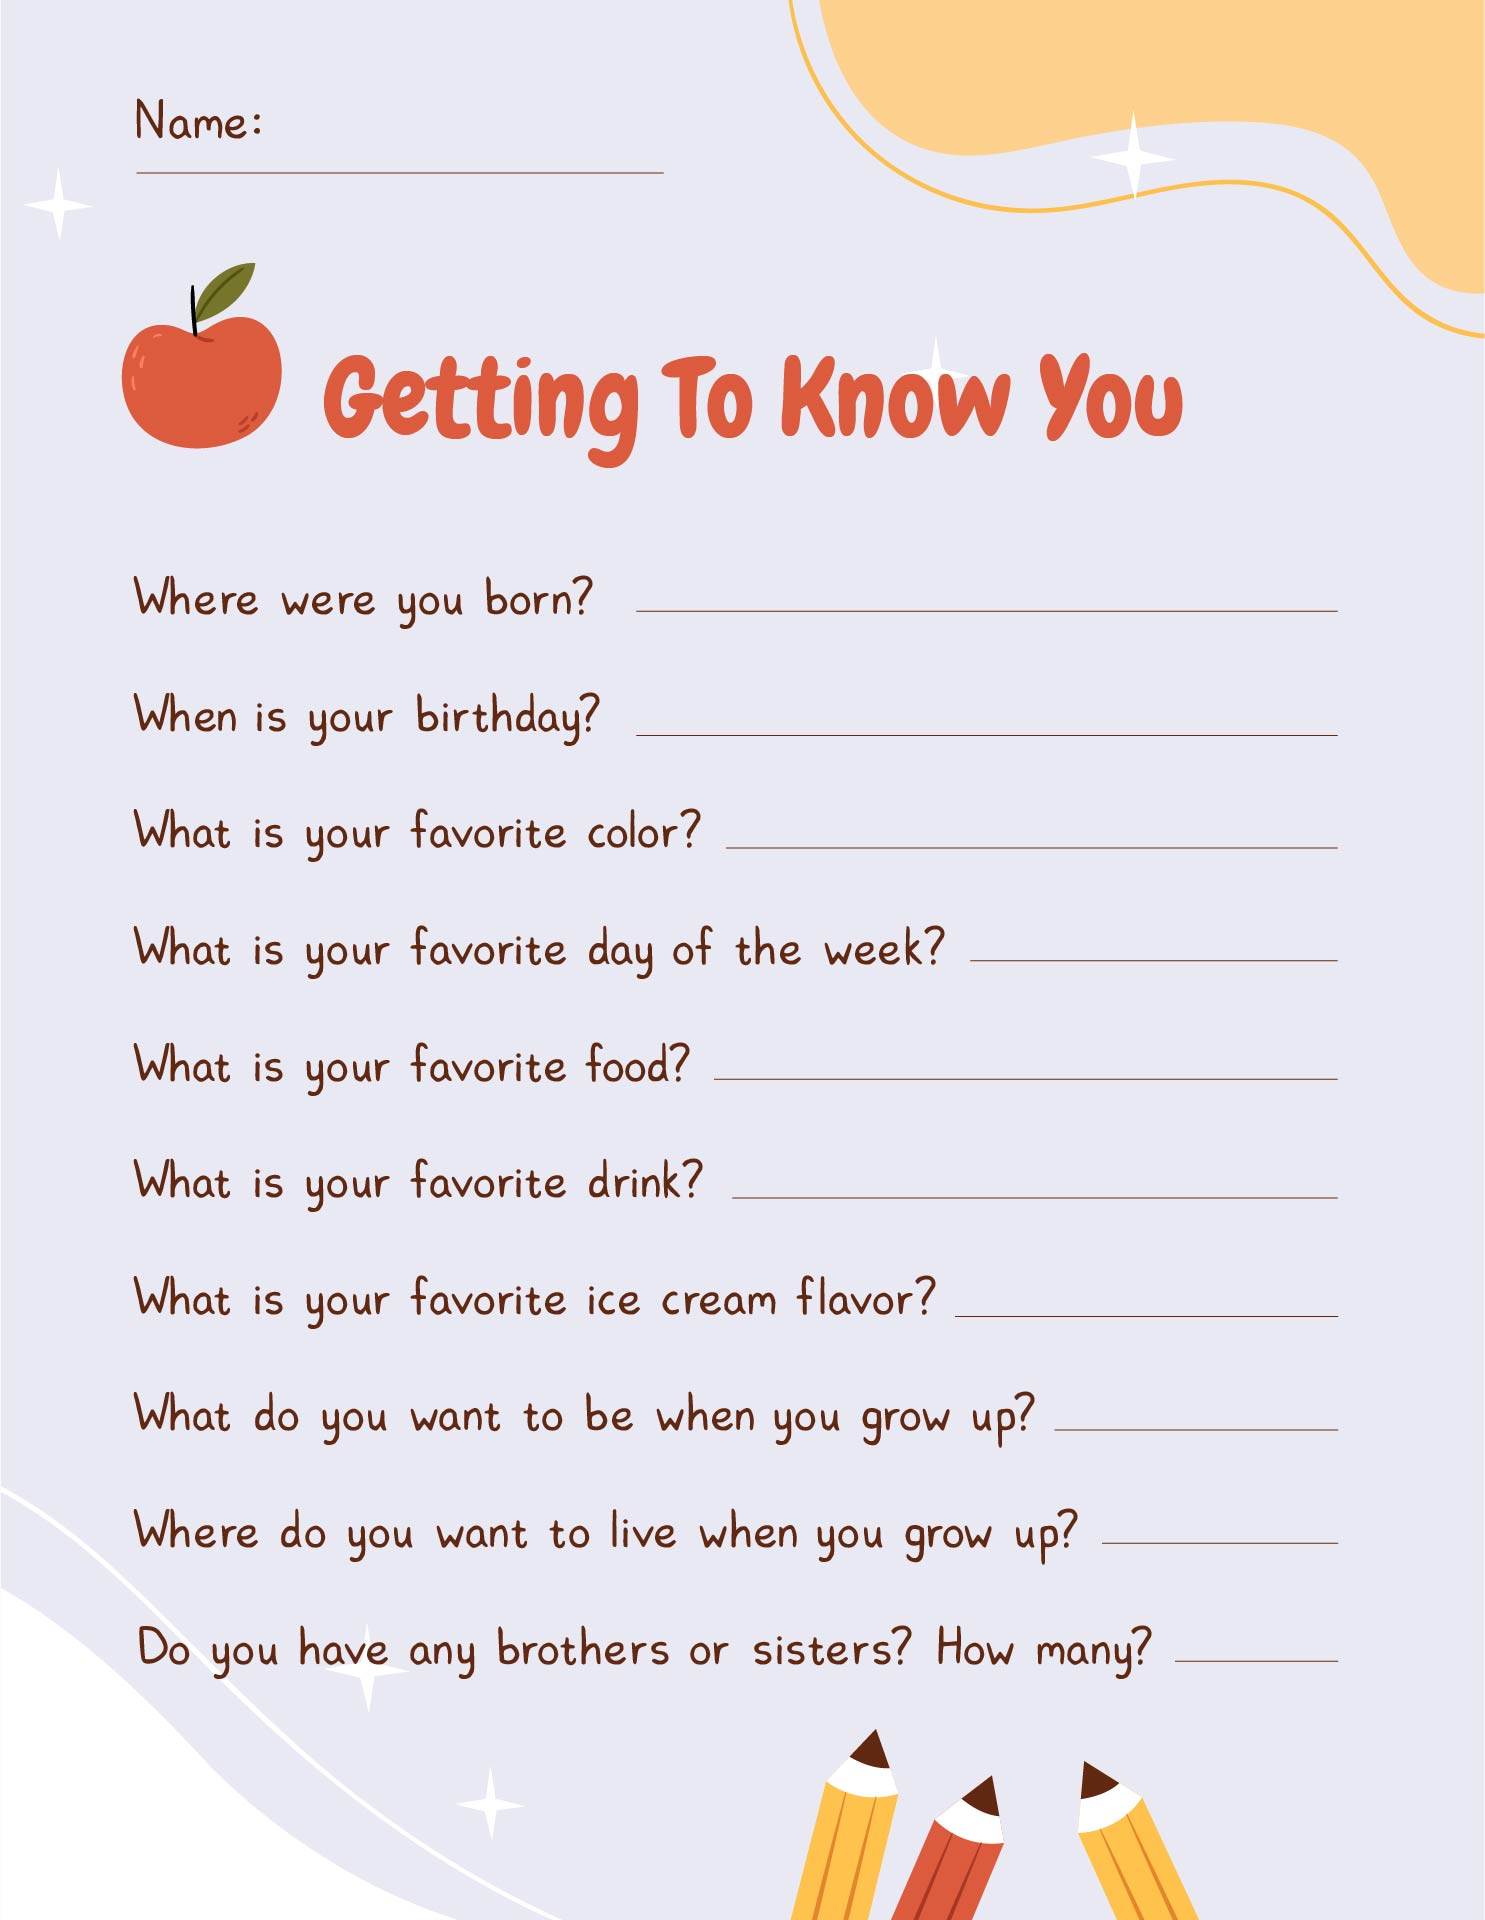 8-best-images-of-getting-to-know-you-printables-for-adults-kids